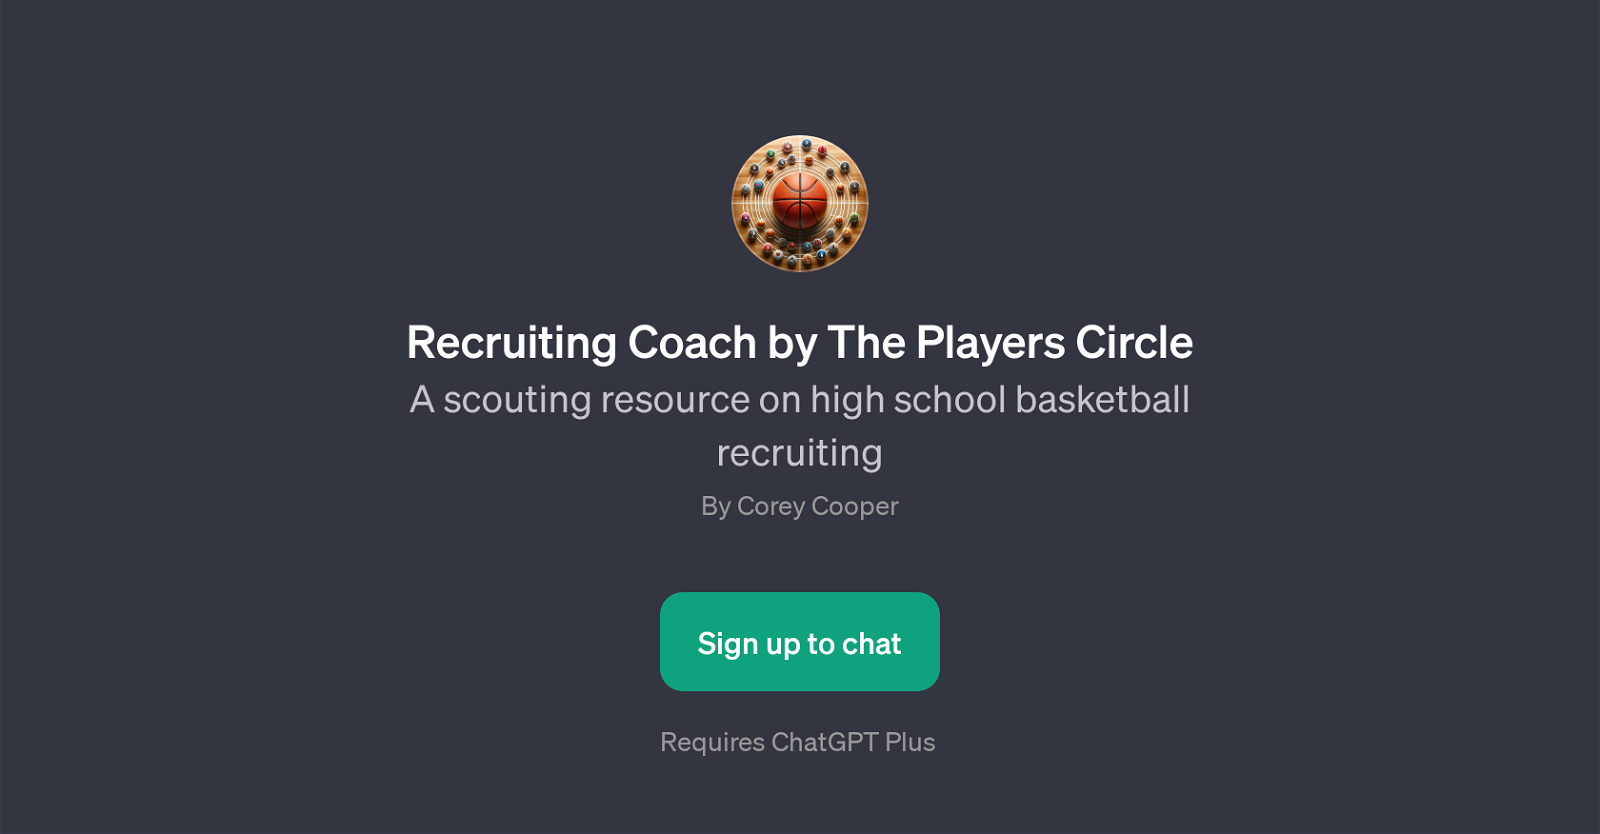 Recruiting Coach by The Players Circle website